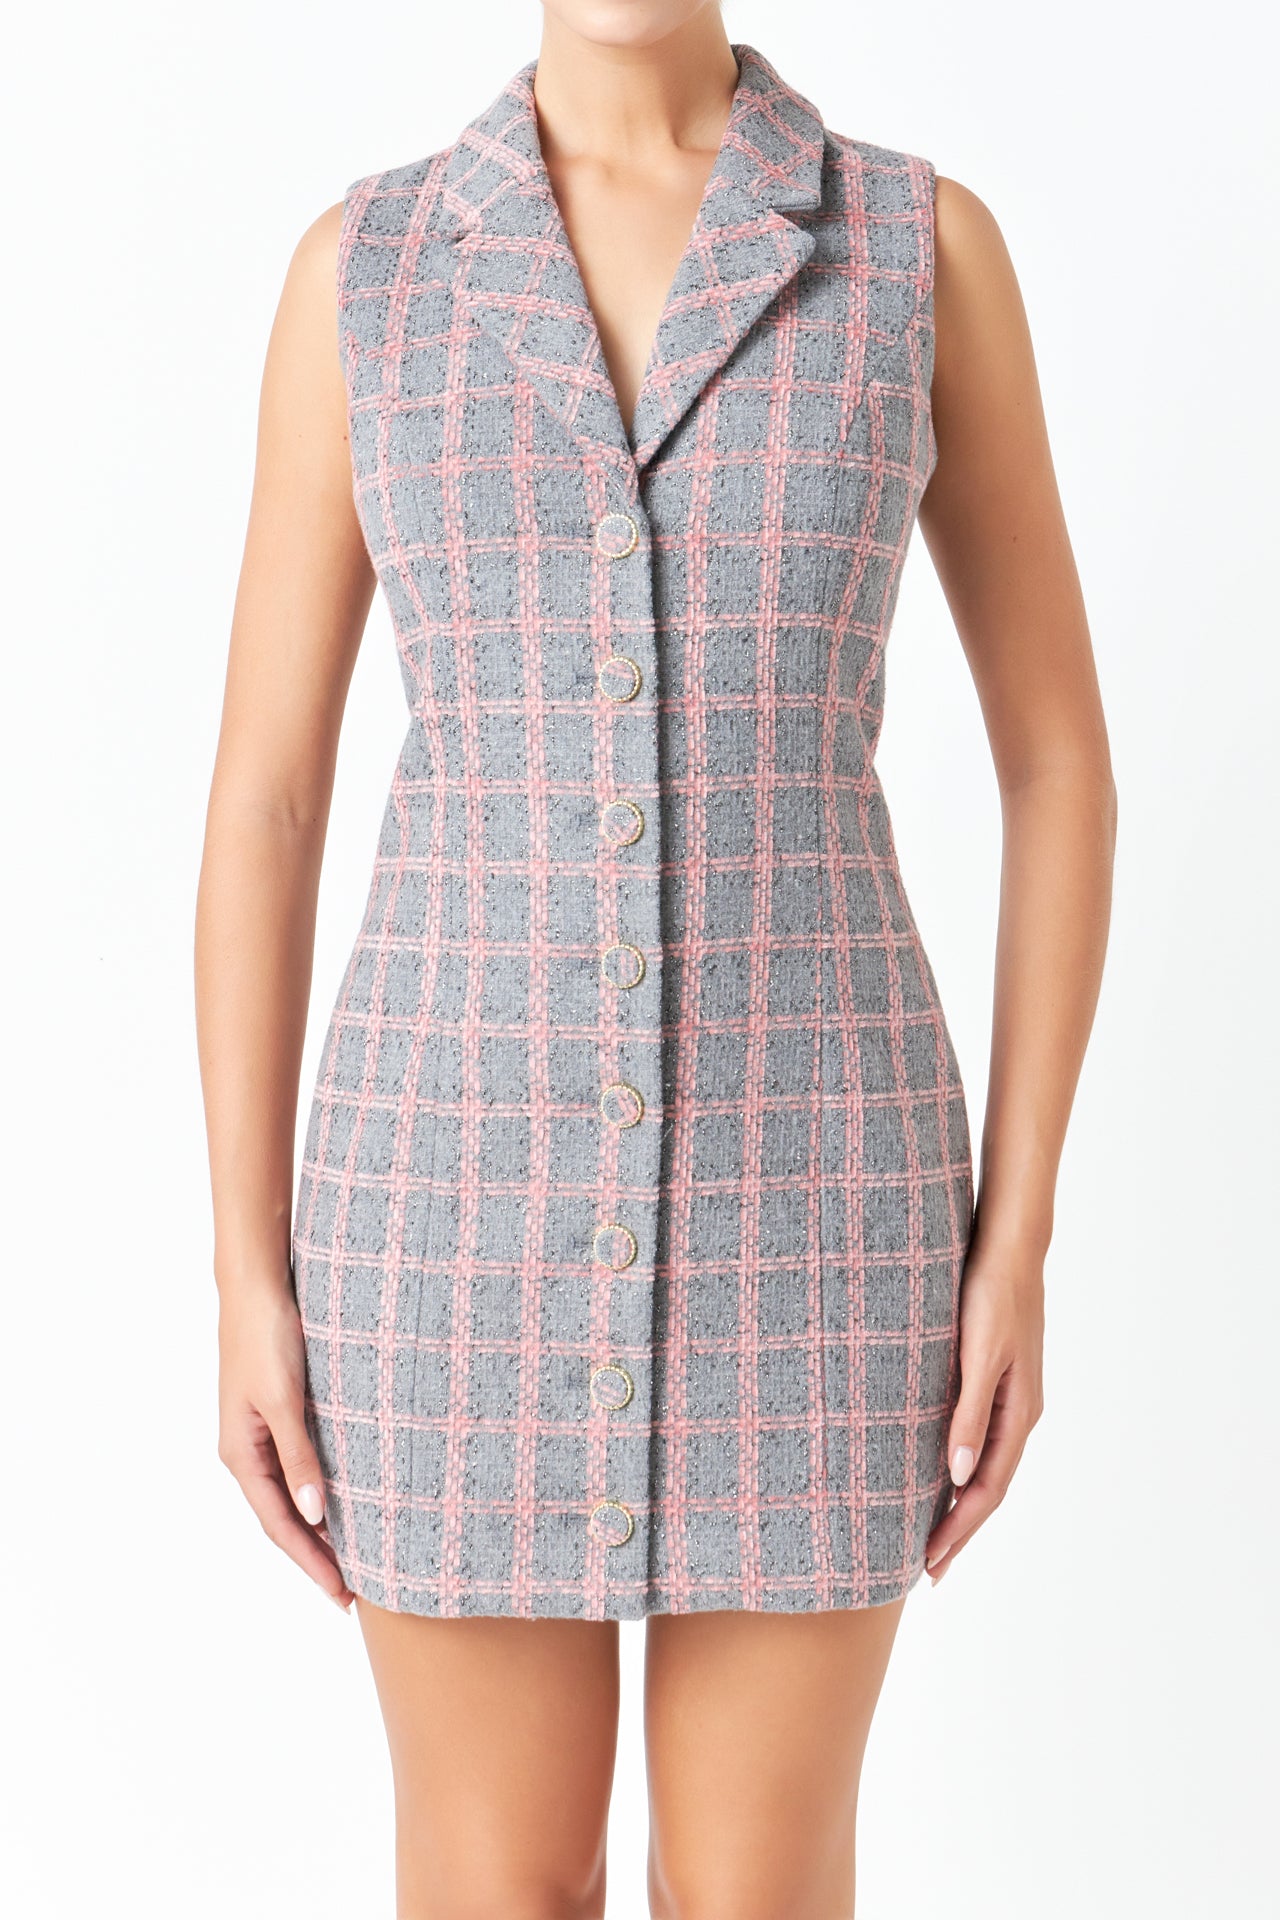 Endless Rose - Tweed Sleeveless Dress - Dresses in Women's Clothing available at endlessrose.com